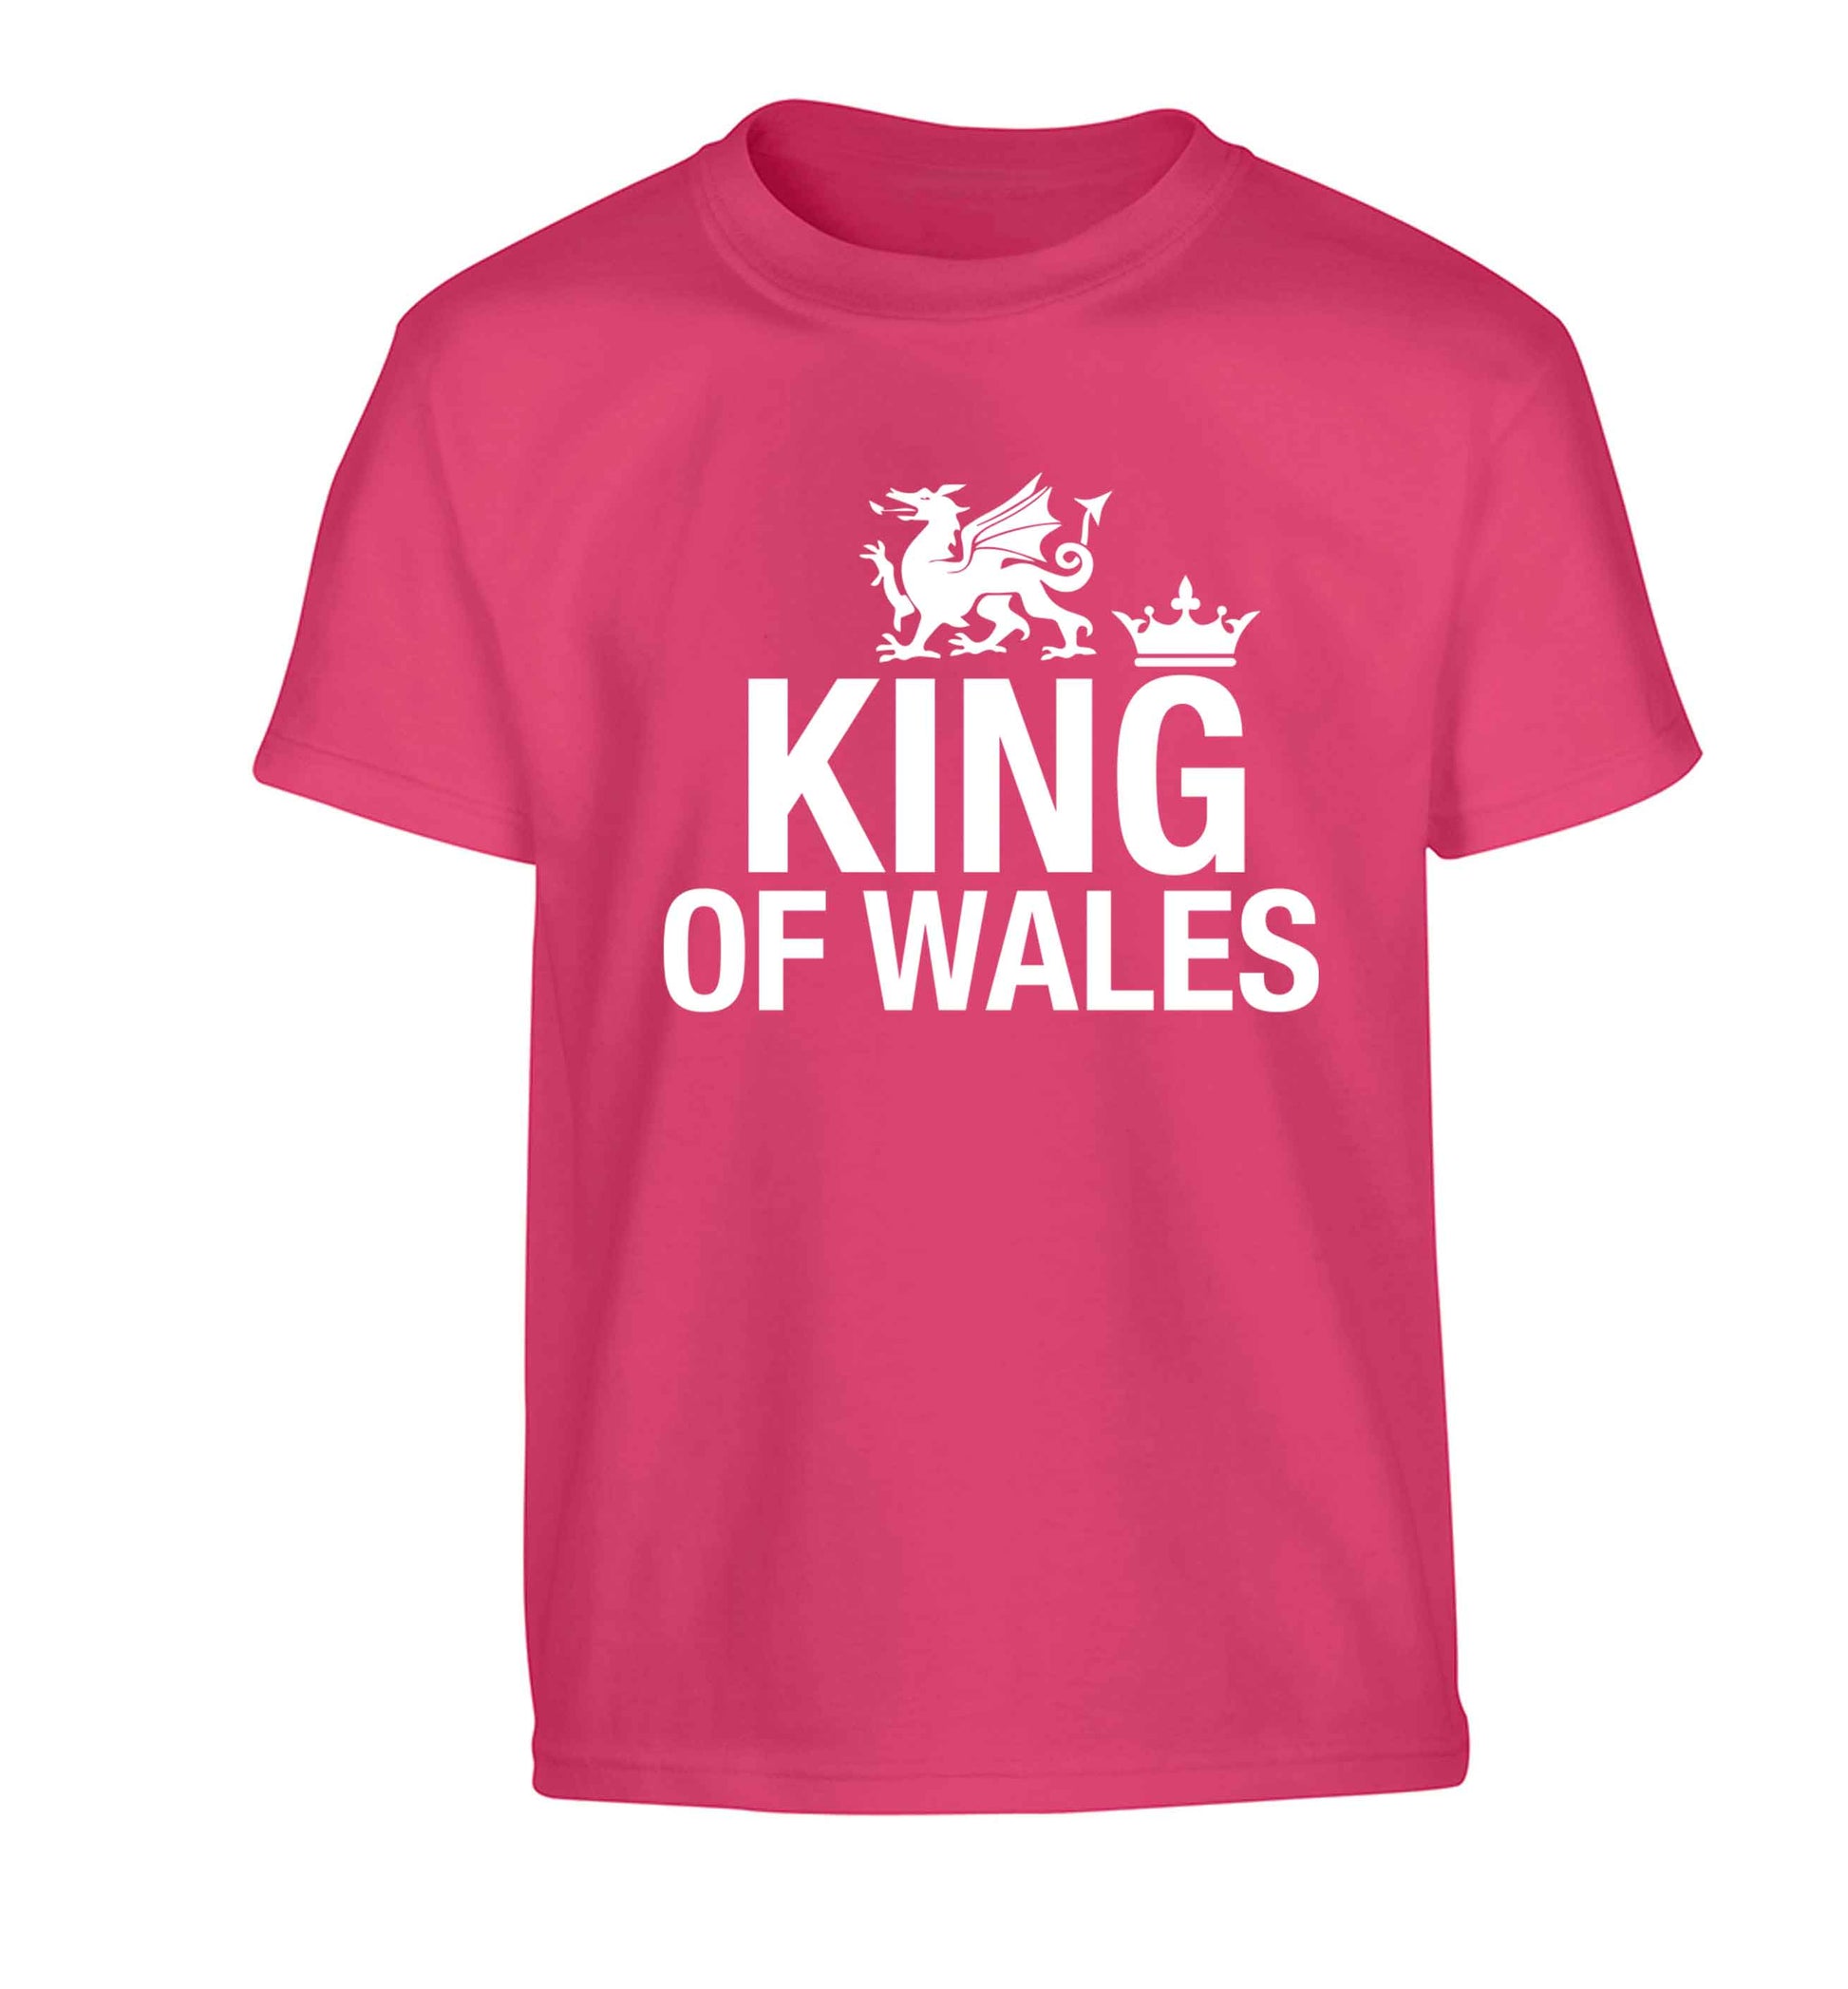 King of Wales Children's pink Tshirt 12-13 Years